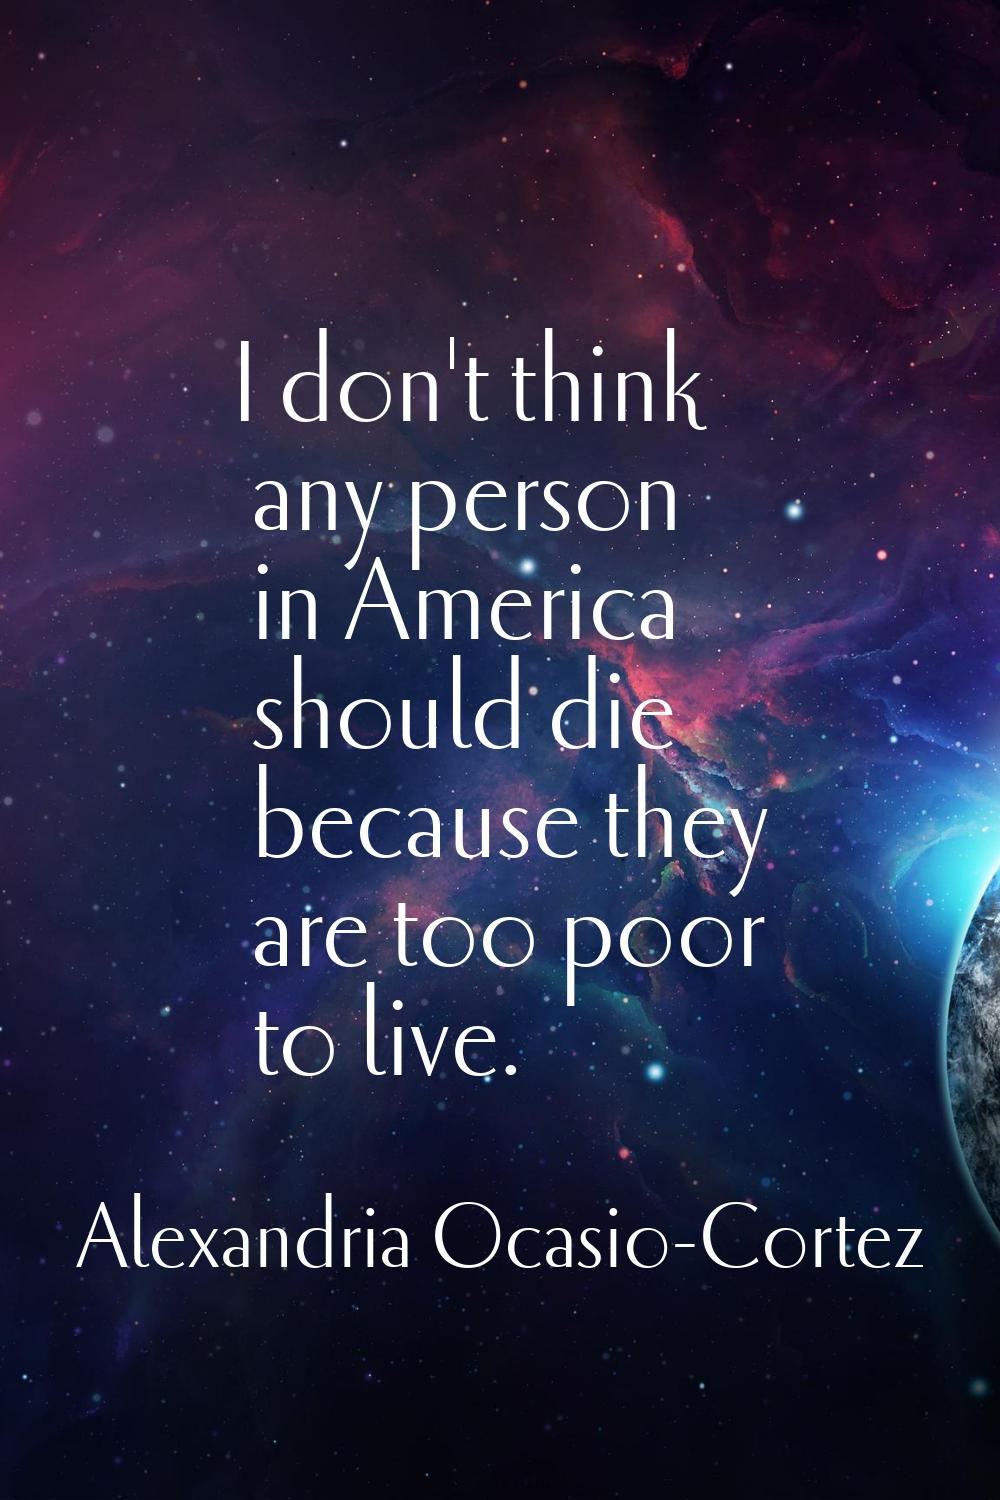 I don't think any person in America should die because they are too poor to live.